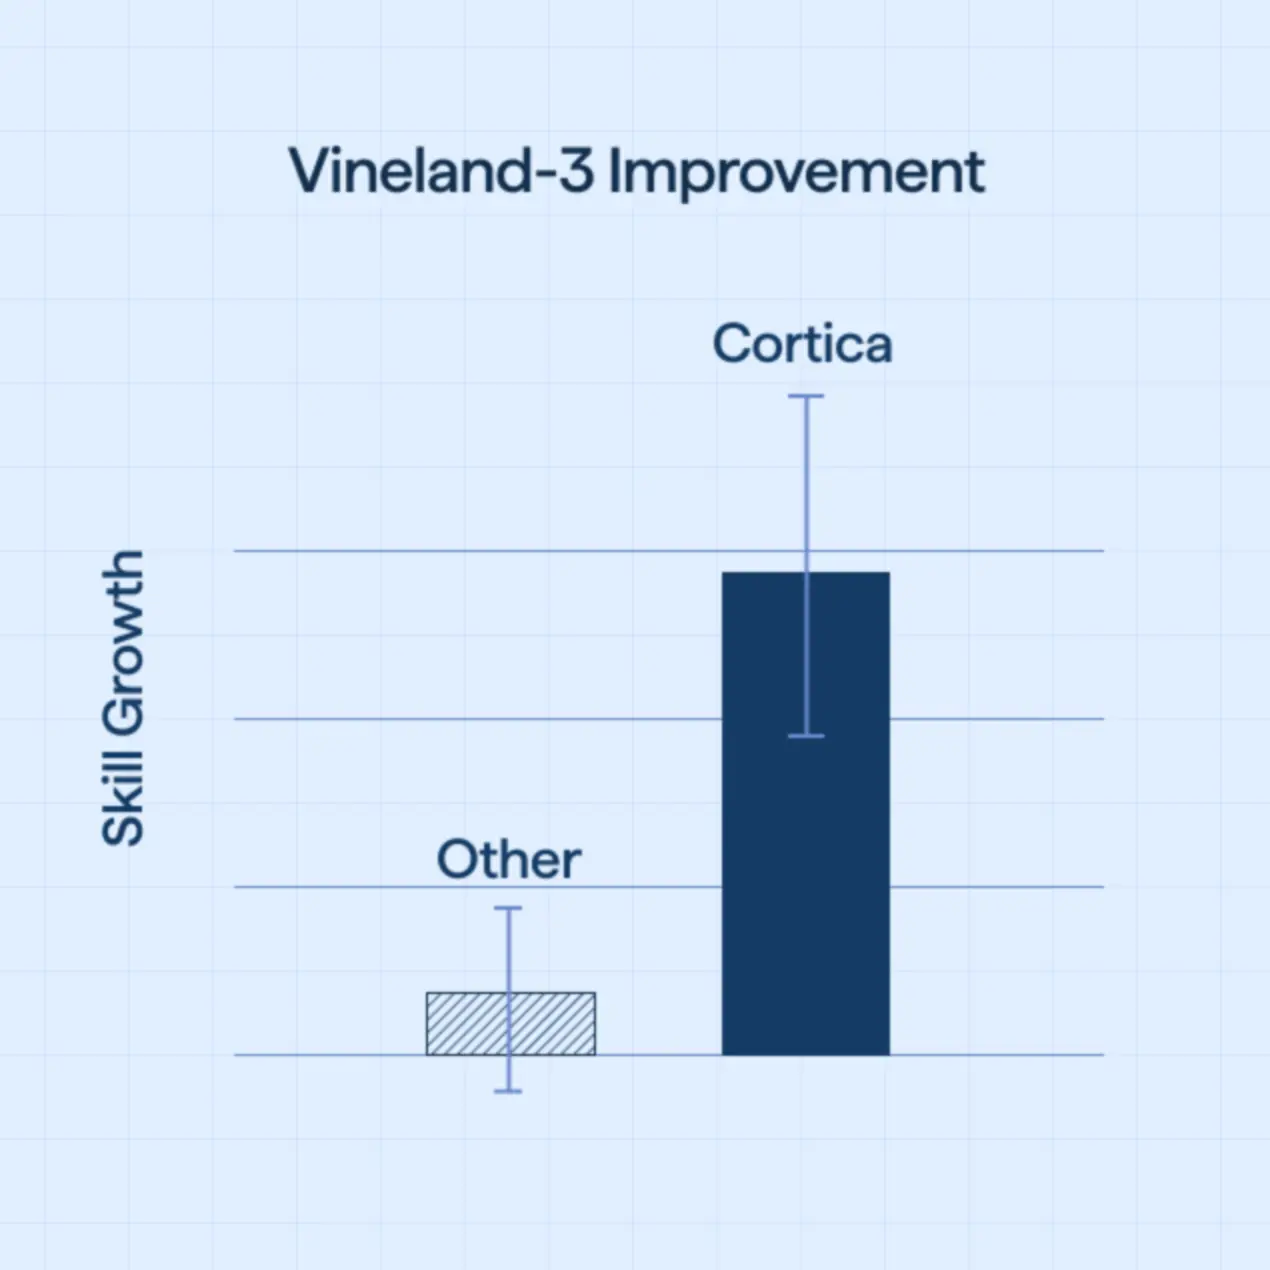 A chart showing vineland-3 improvement scored, with Cortica outperforming "other" competitors